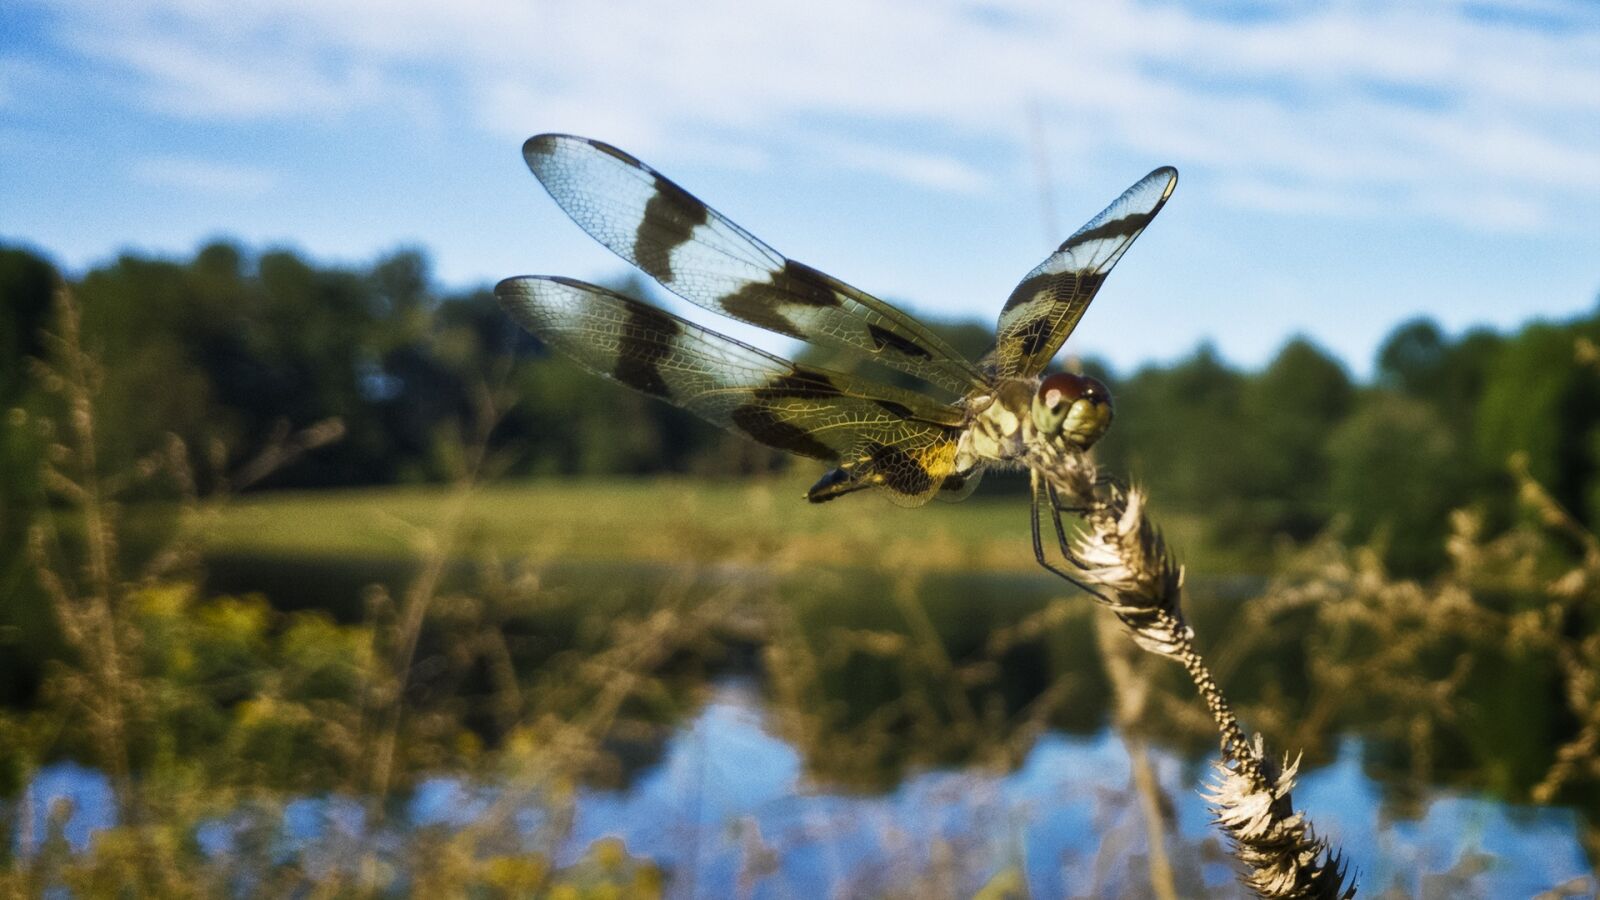 OnePlus A3000 sample photo. Dragonfly, insect, summer photography